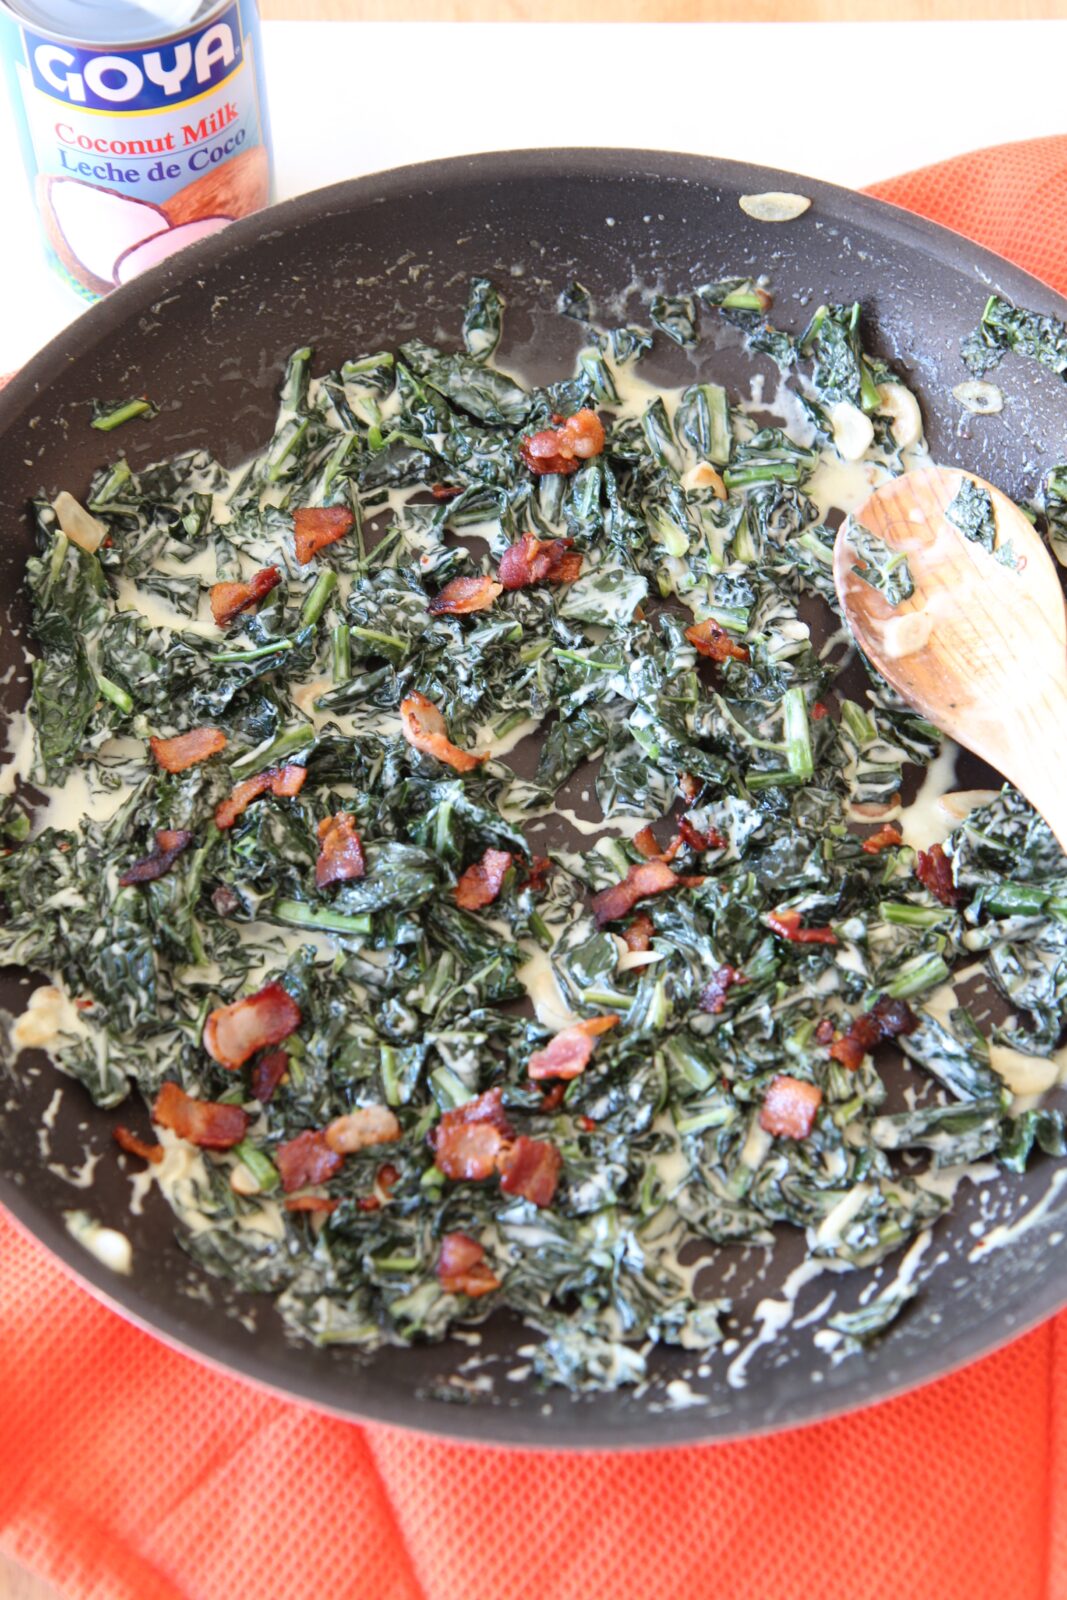 Bacon Coconut Creamed Kale Recipe - that is creamy decadent comfort food you will crave. This recipe is so easy and is a one pot side dish. Ingredients include, bacon, coconut milk, kale, garlic, red pepper flakes, and apple cider vinegar. Happy comfort food cooking! www.ChopHappy.com